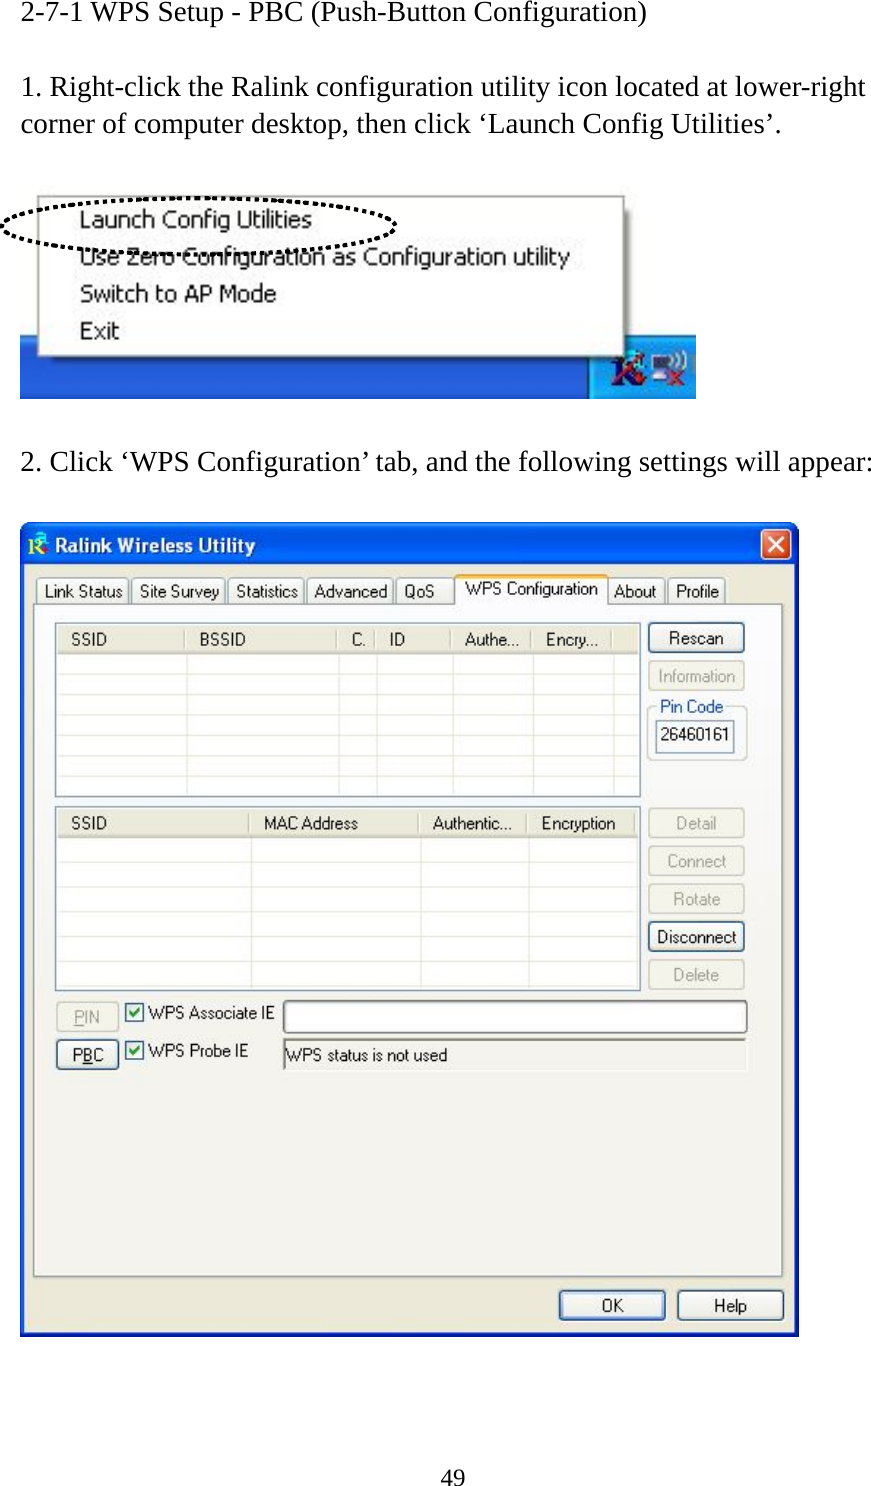  492-7-1 WPS Setup - PBC (Push-Button Configuration)  1. Right-click the Ralink configuration utility icon located at lower-right corner of computer desktop, then click ‘Launch Config Utilities’.    2. Click ‘WPS Configuration’ tab, and the following settings will appear:    